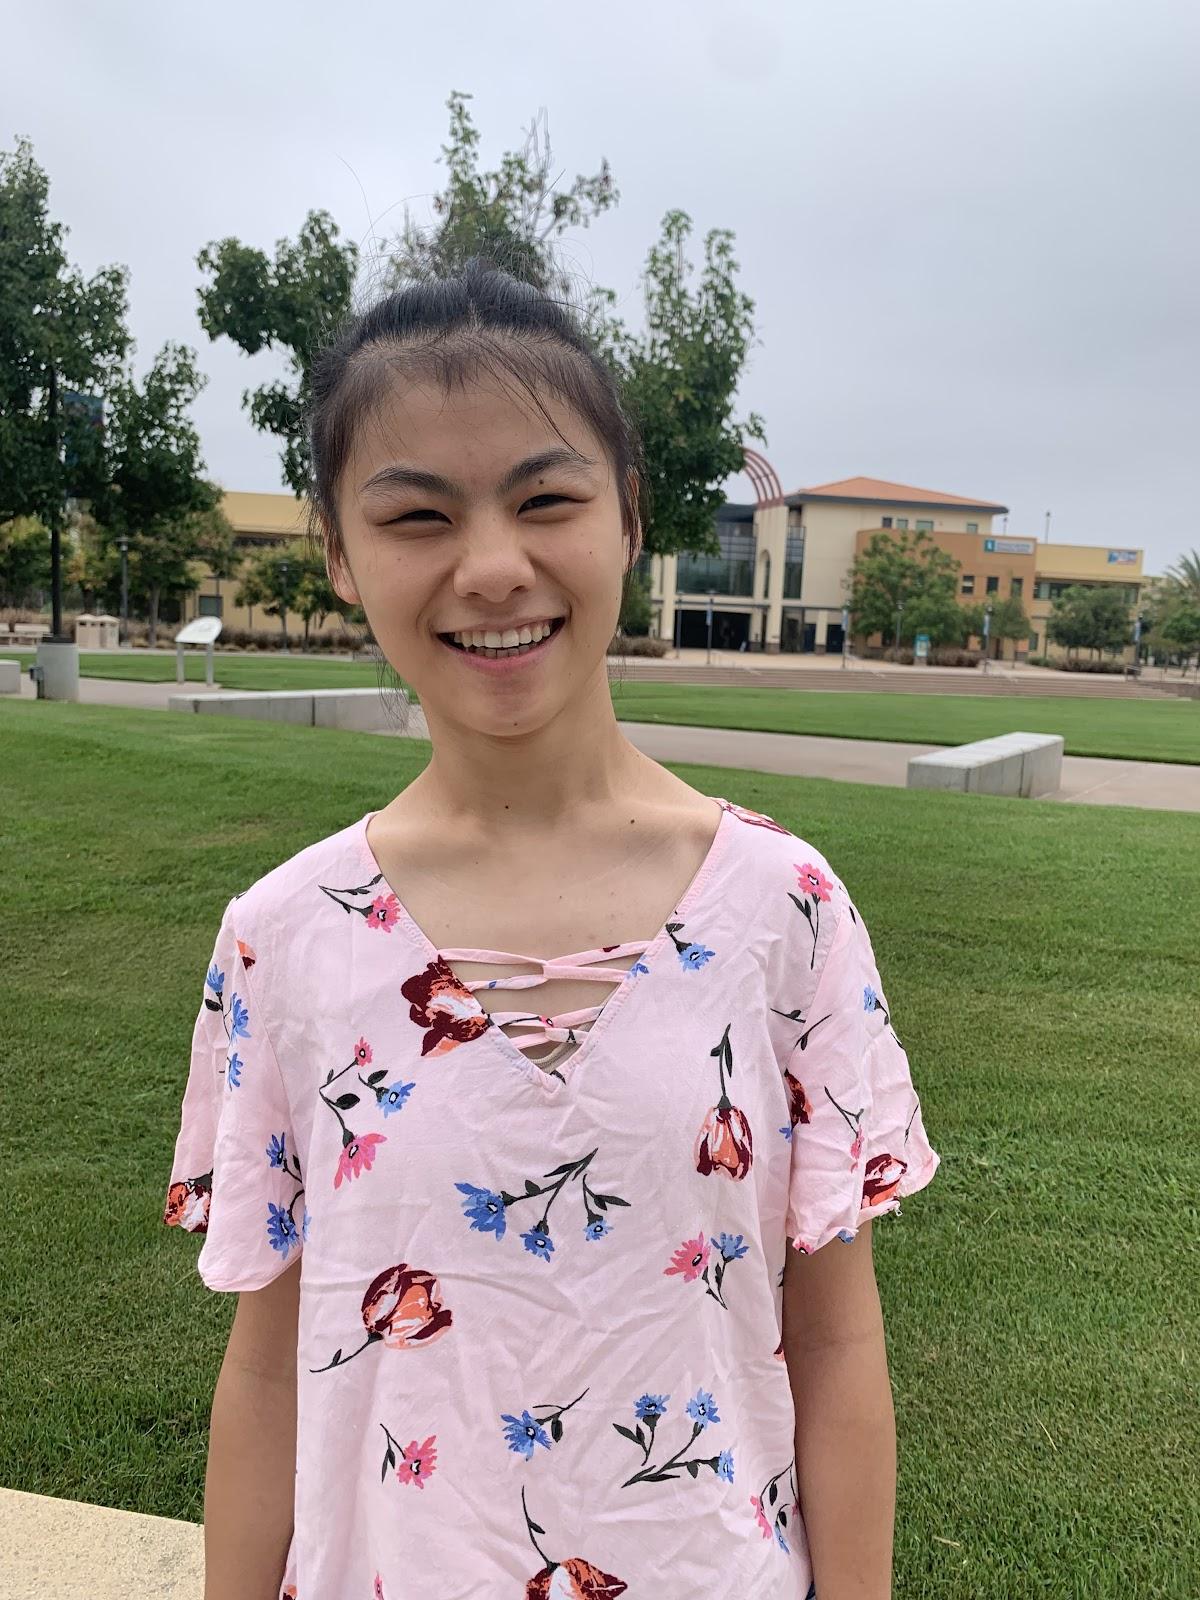 Yuhan stands on the Miramar campus wearing a pink floral shirt, smiling